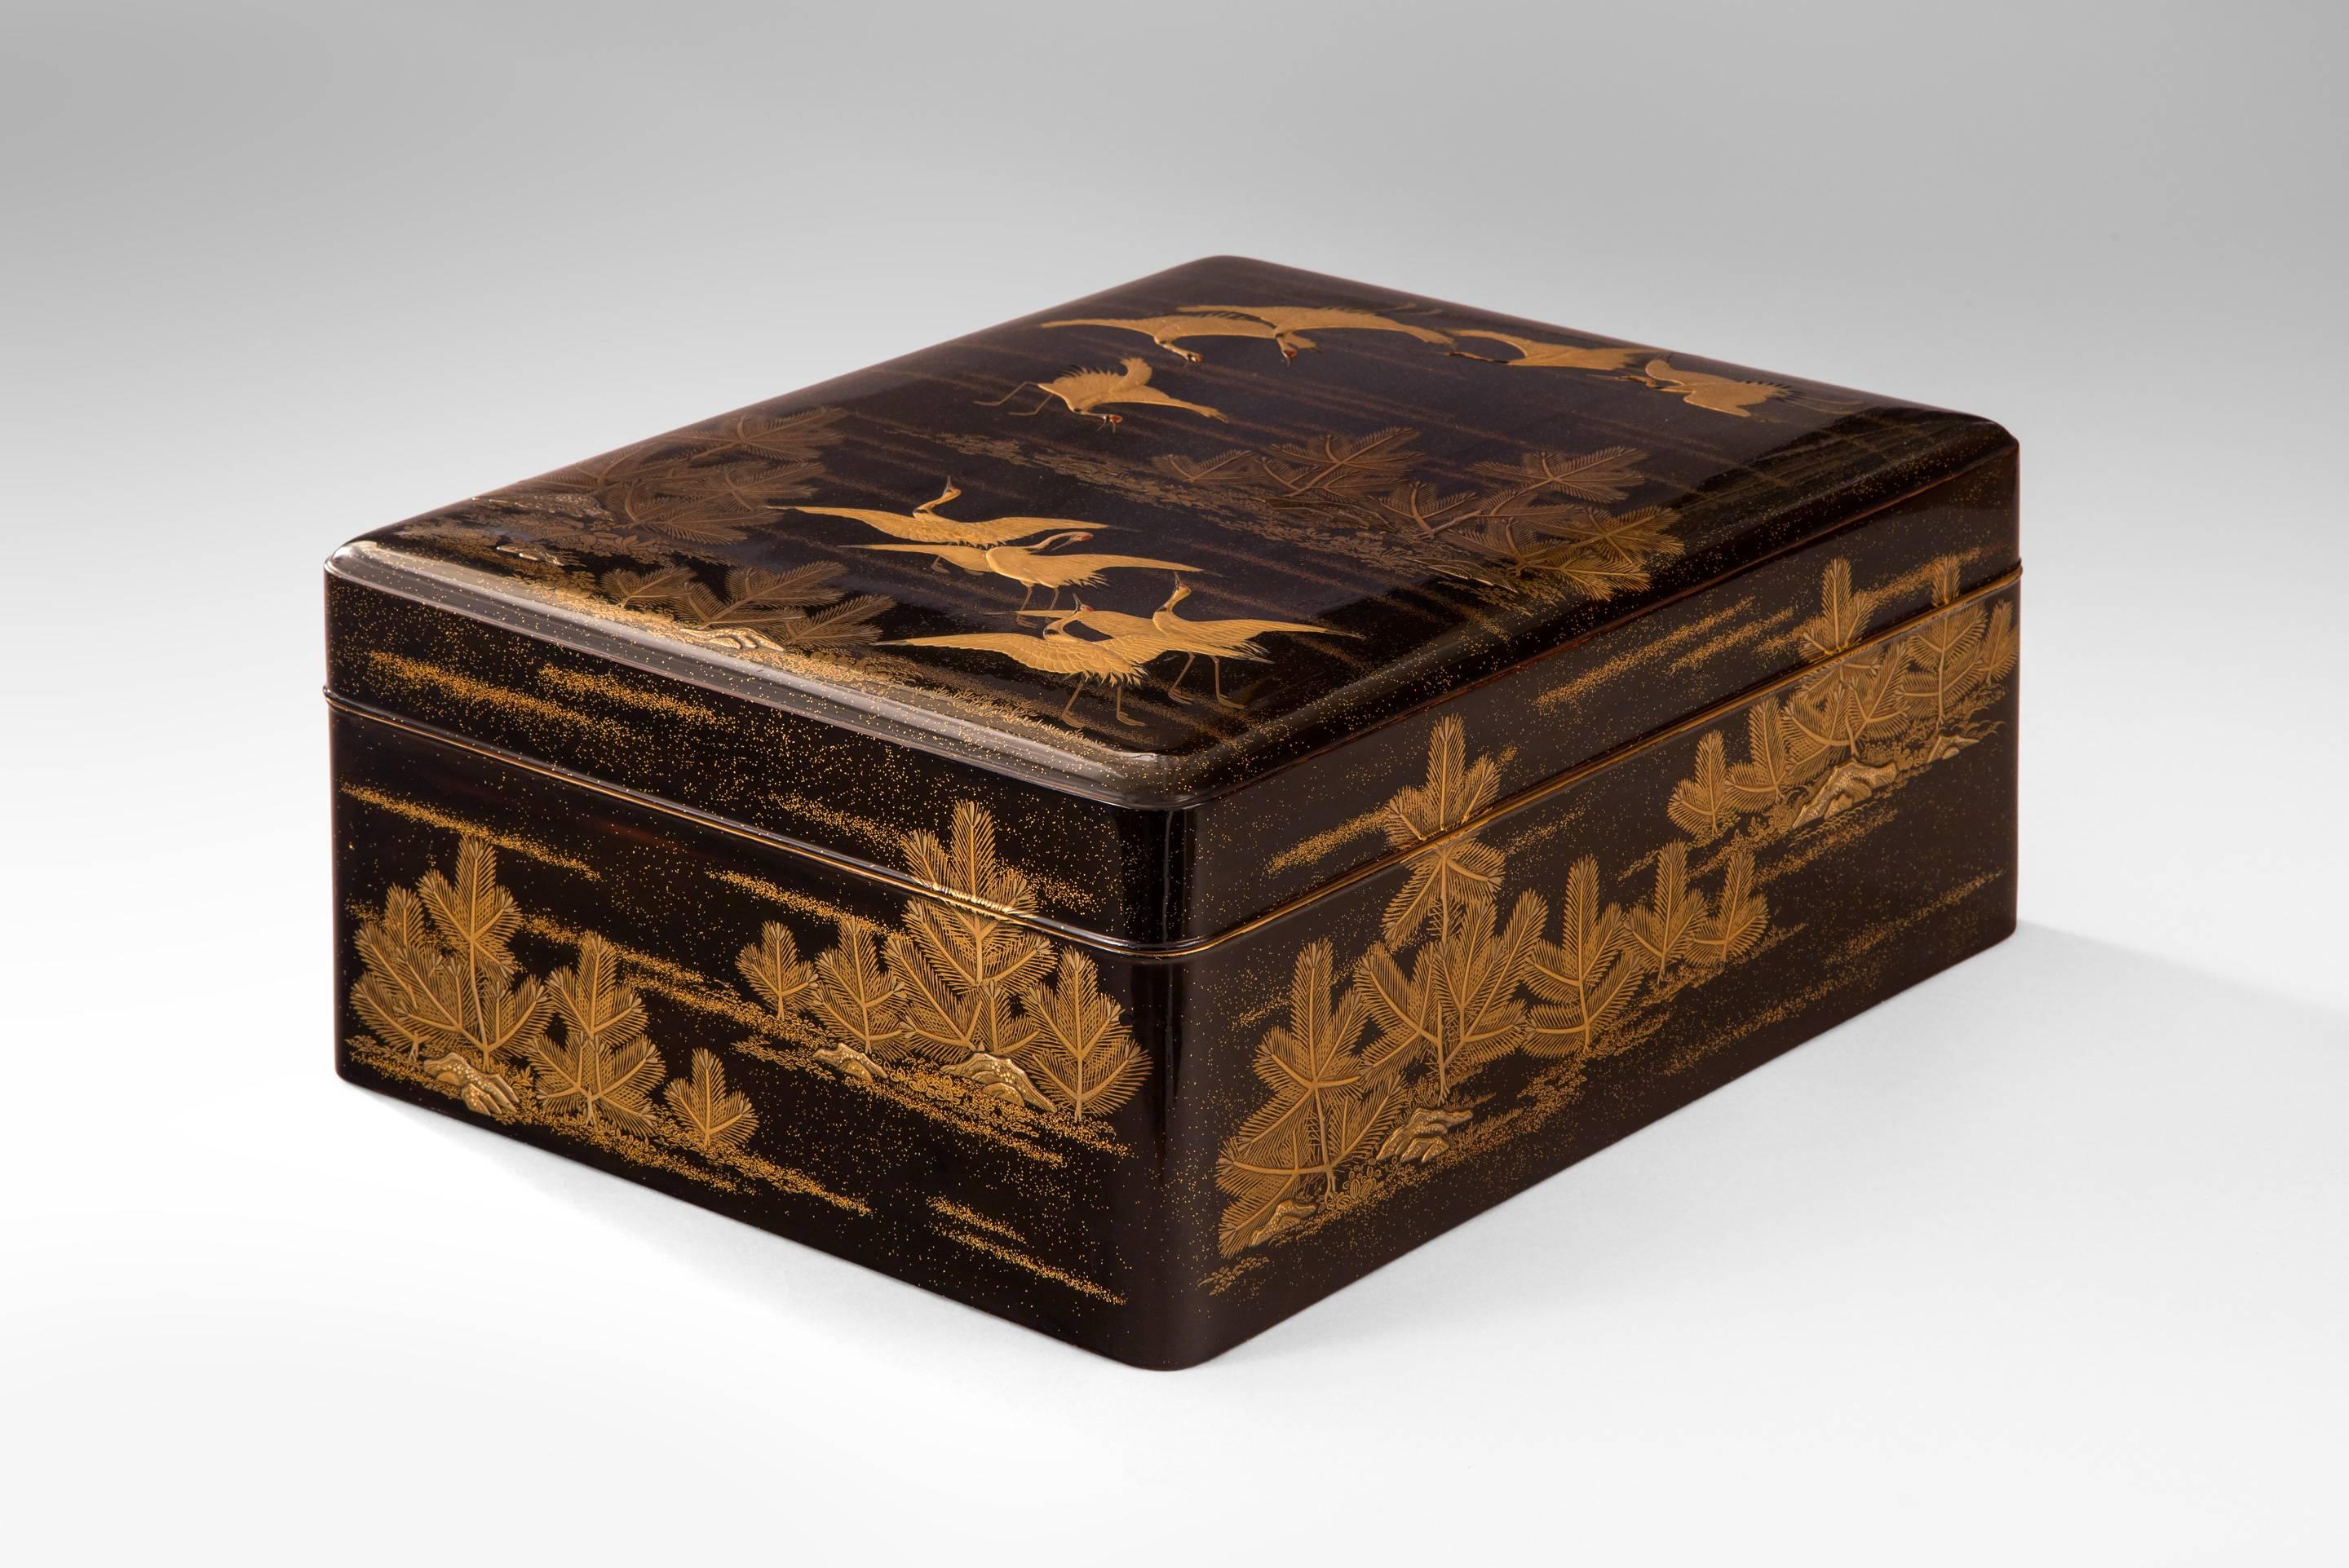 A Large Japanese Gold Lacquer Box (Bunko) Depicting Cranes and Pine Trees In Good Condition For Sale In New York, NY